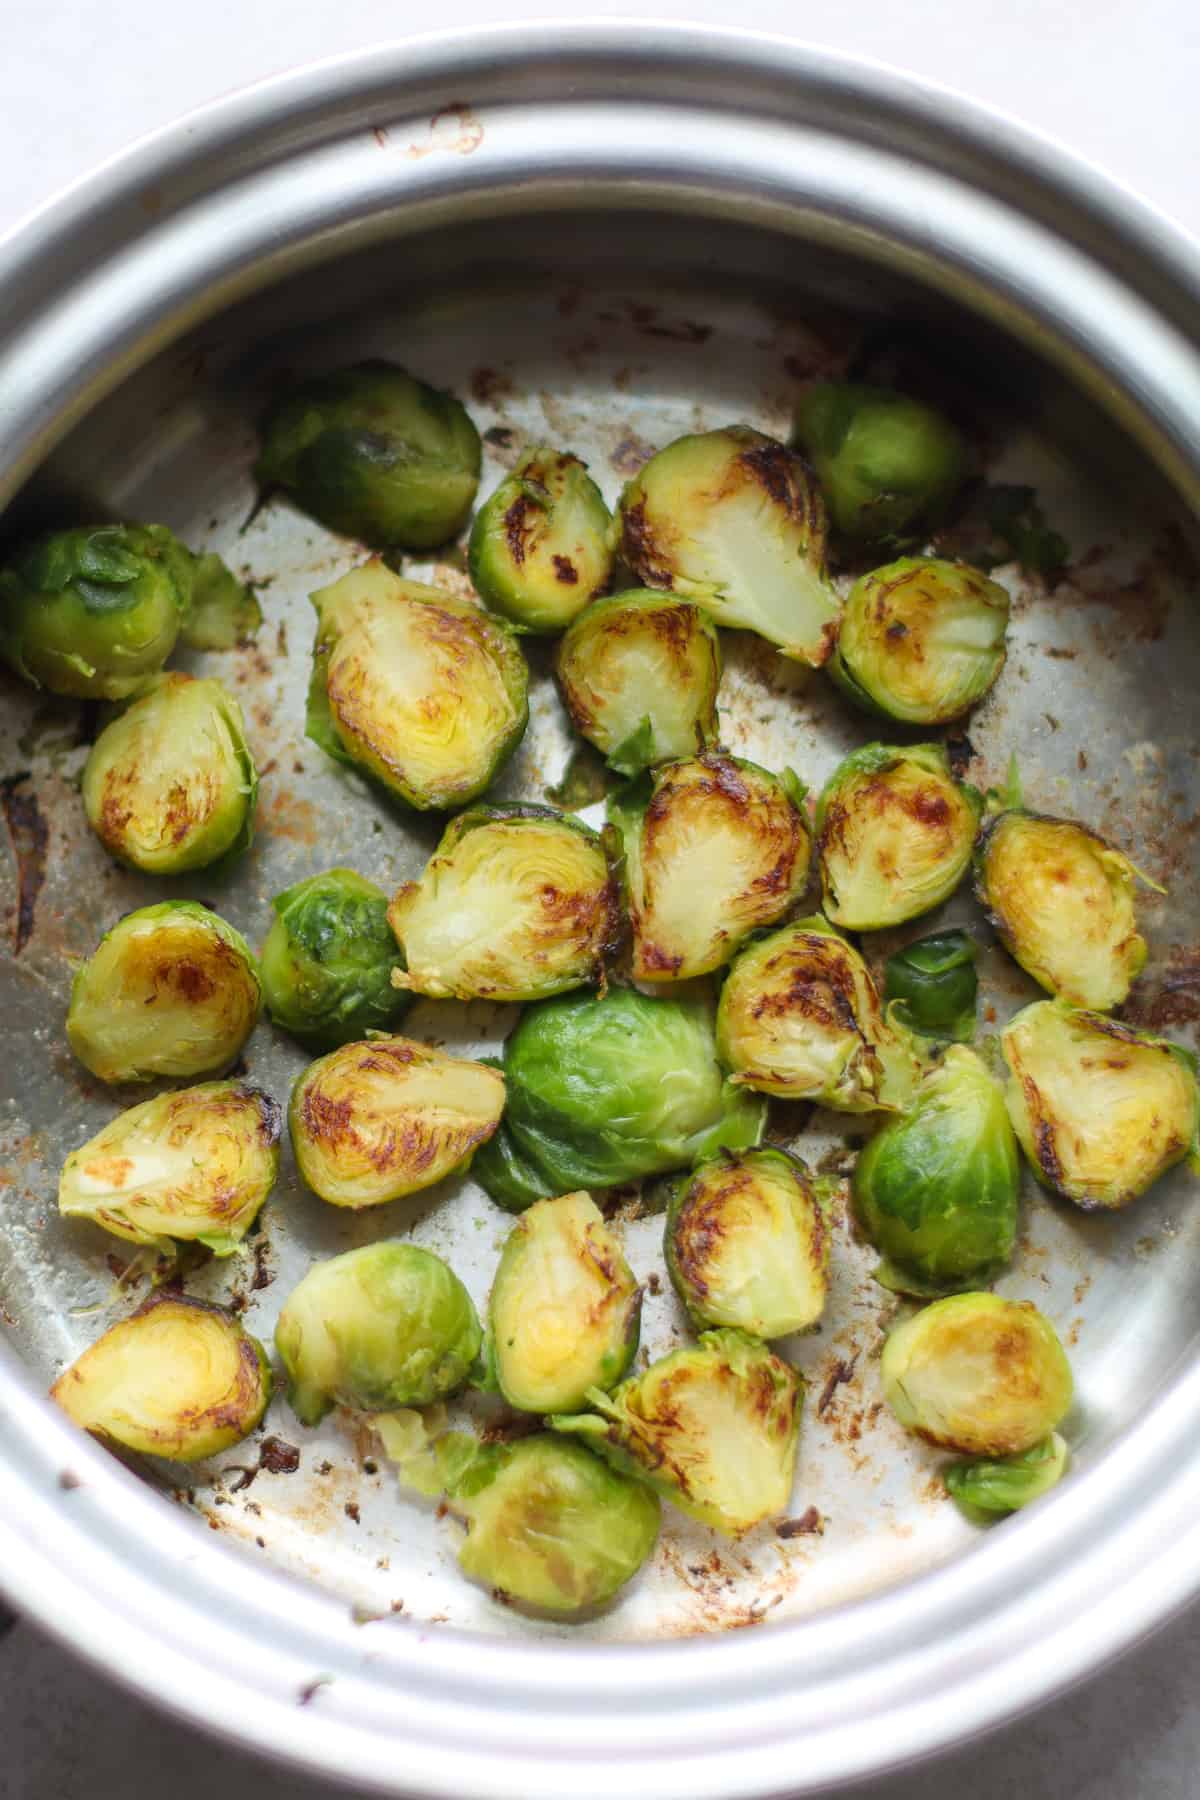 Sauteed frozen Brussels sprouts in a large pan.